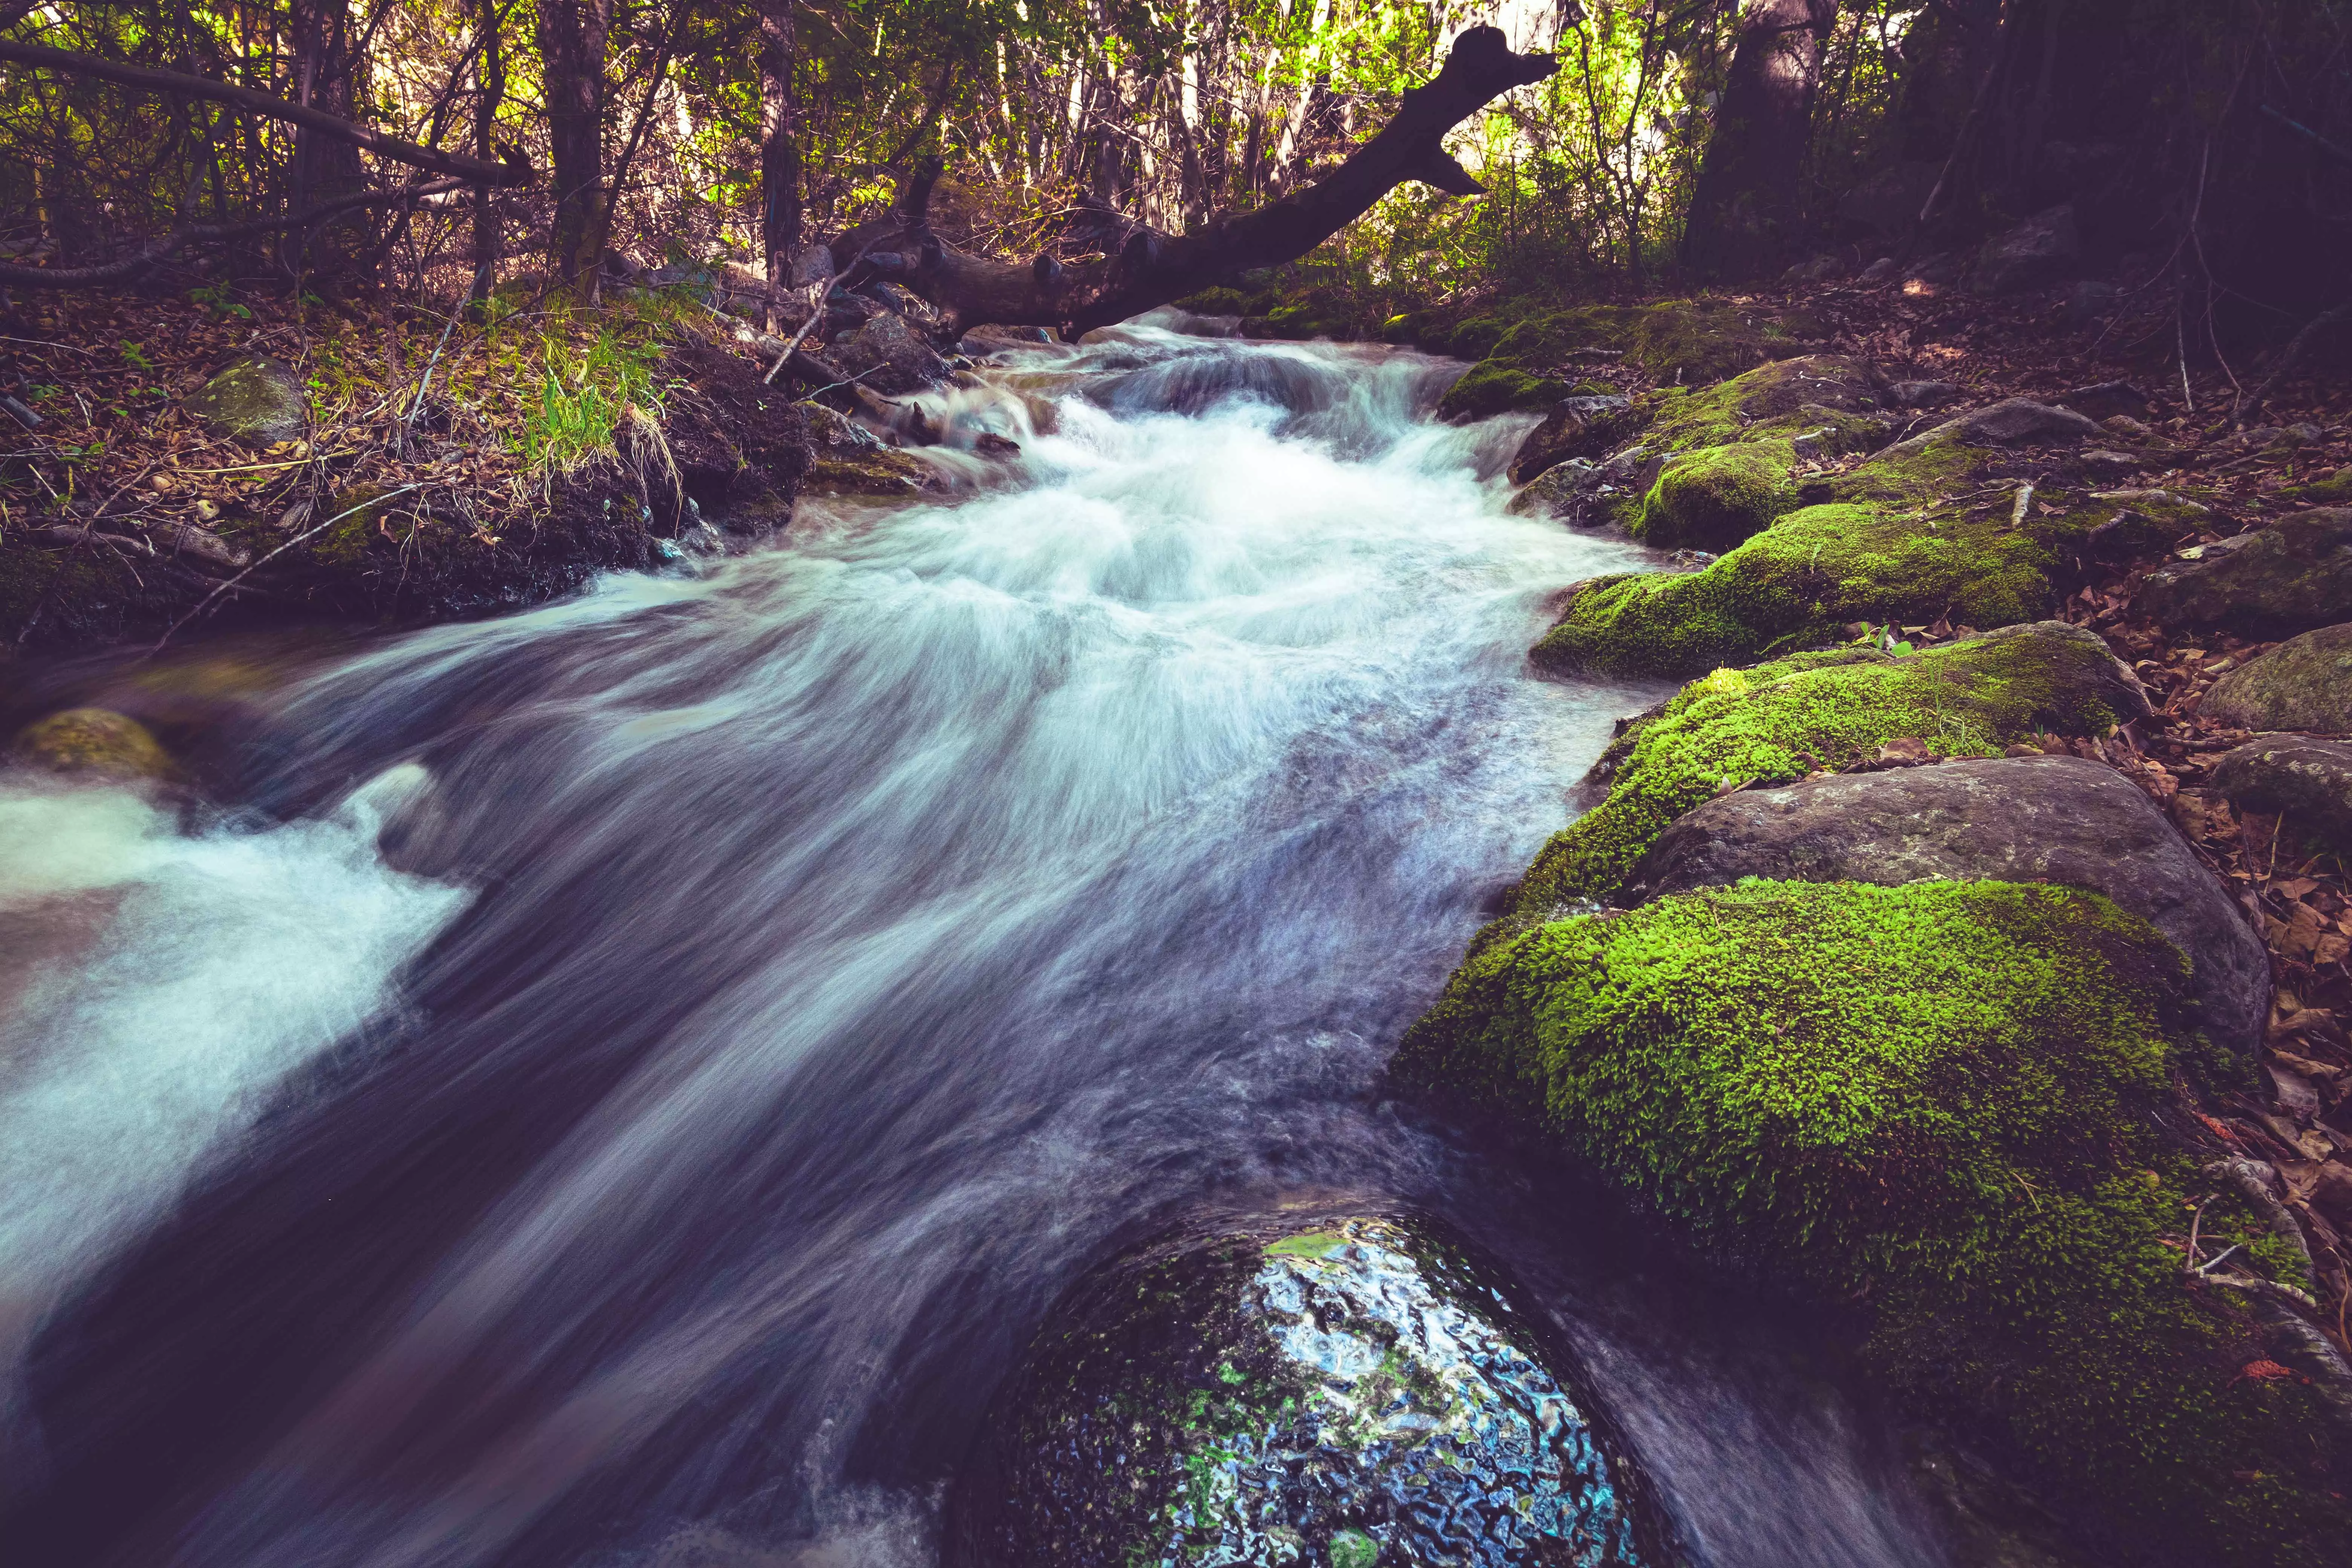 Water stream surrounded by rocks, moss, and trees.